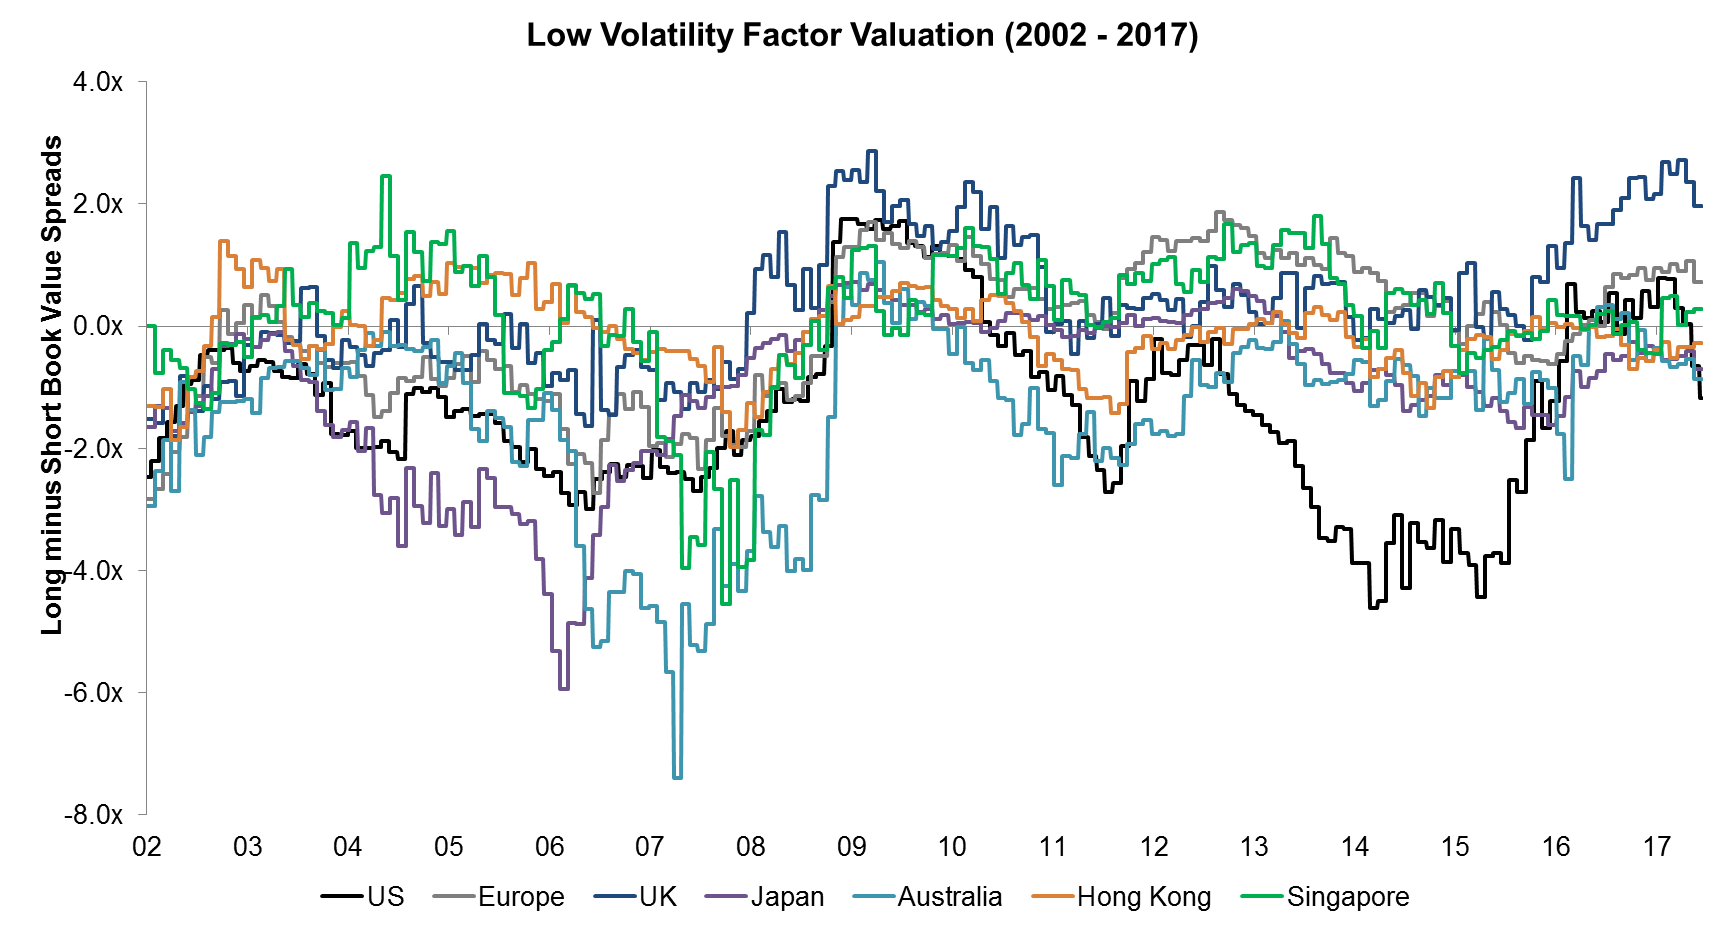 Low Volatility Factor Valuation (2002 - 2017)